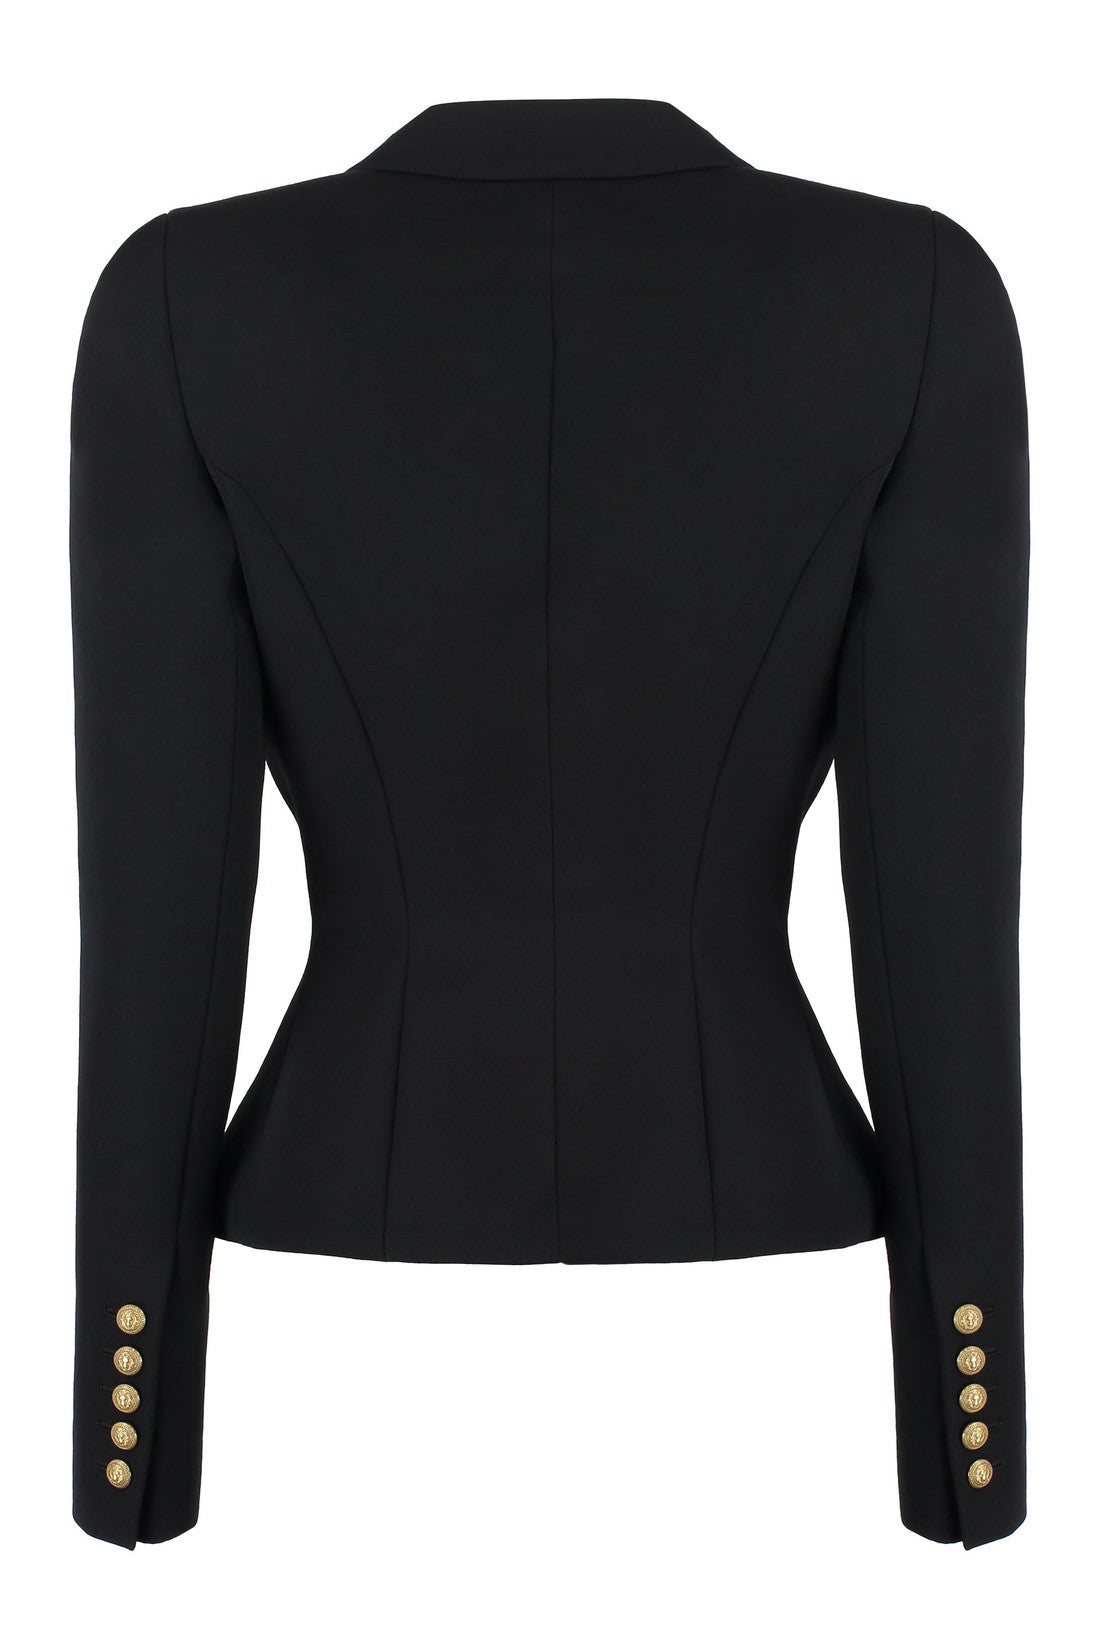 Balmain-OUTLET-SALE-Double-breasted virgin wool jacket-ARCHIVIST